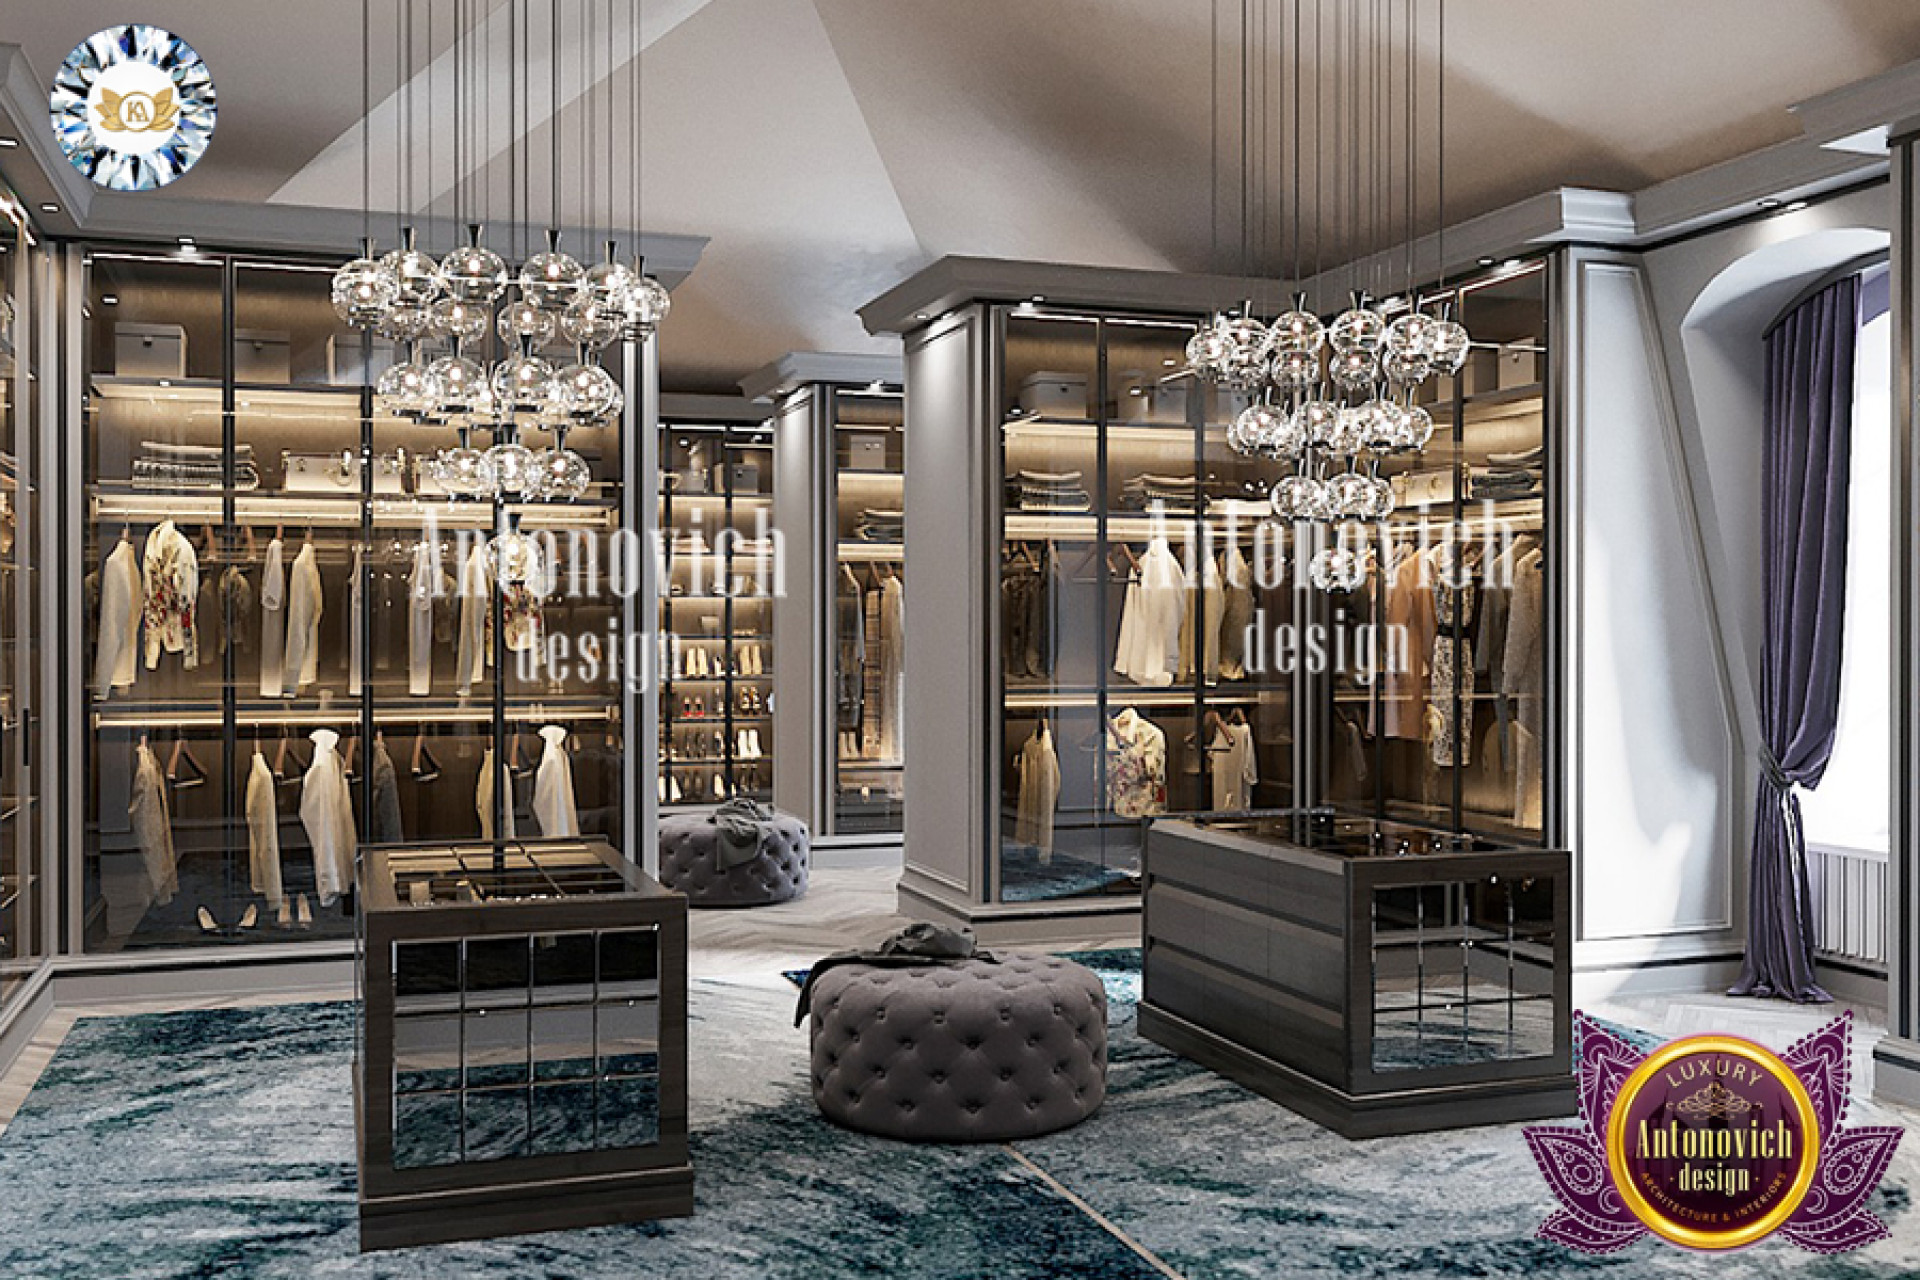 BESPOKE JOINERY SERVICES BY LUXURY ANTONOVICH DESIGN